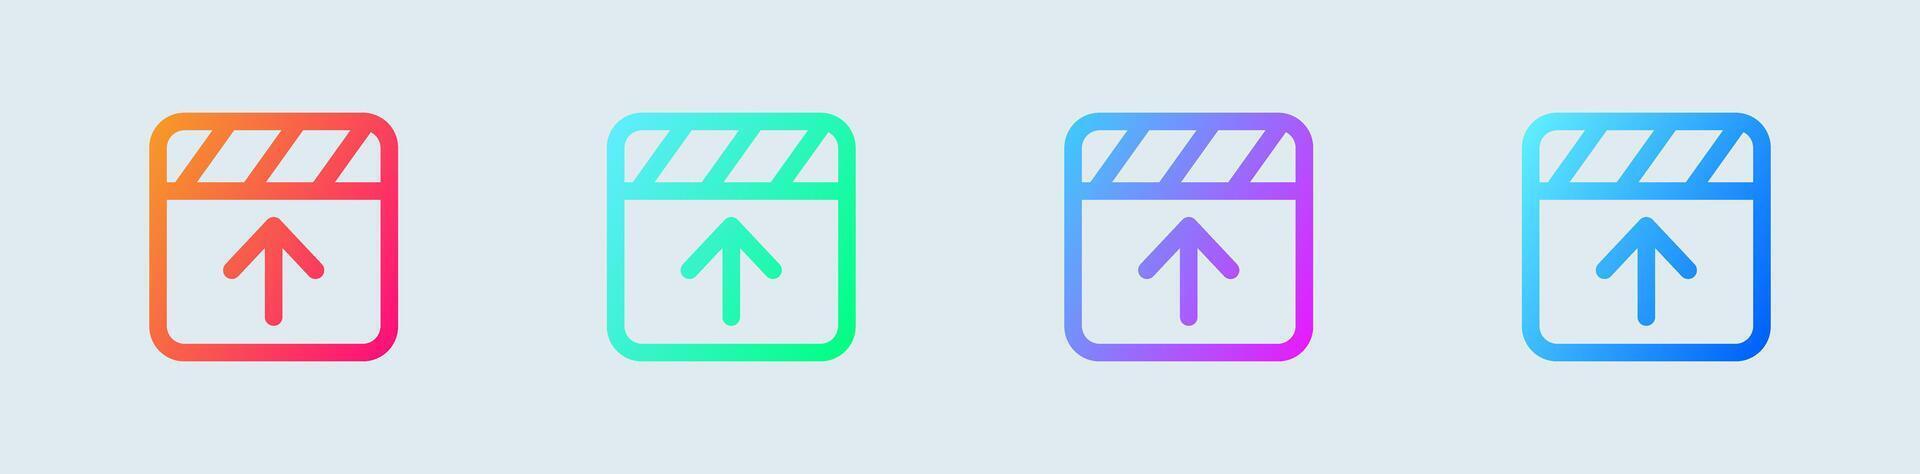 Upload video line icon in gradient colors. Download signs vector illustration.